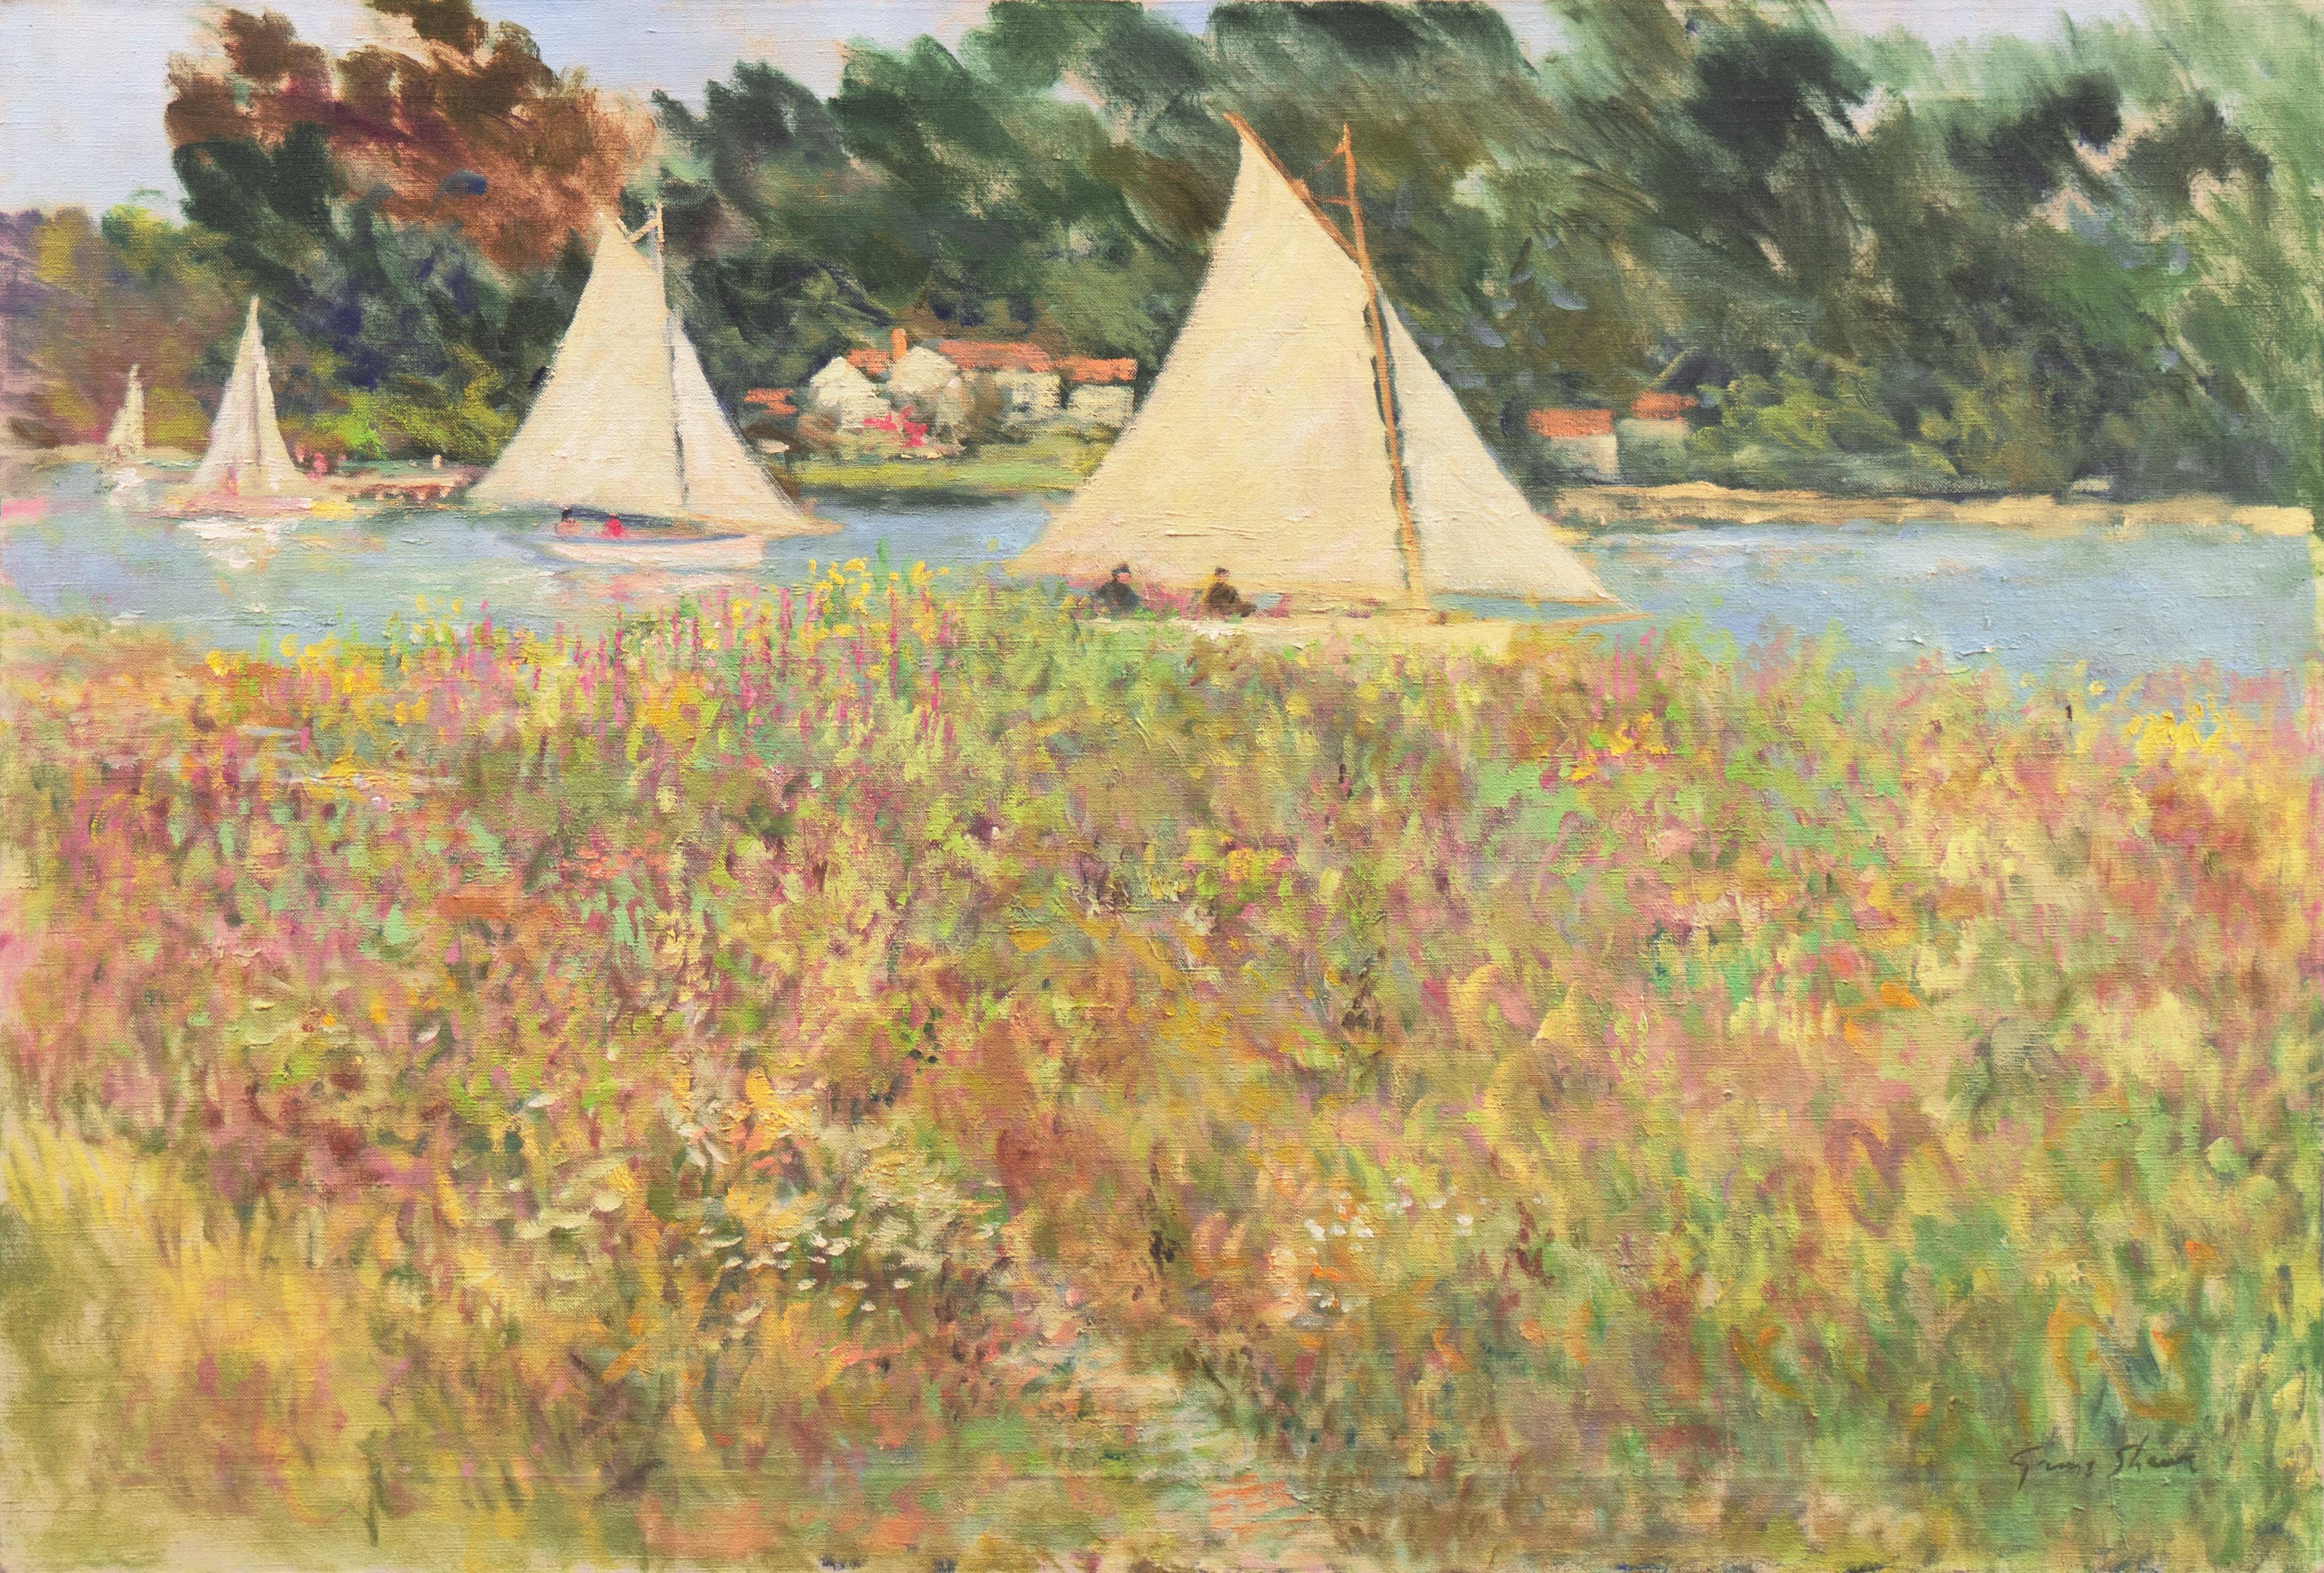 'Boats on the Loire', American Impressionism, Putnam, New York, Large French Oil